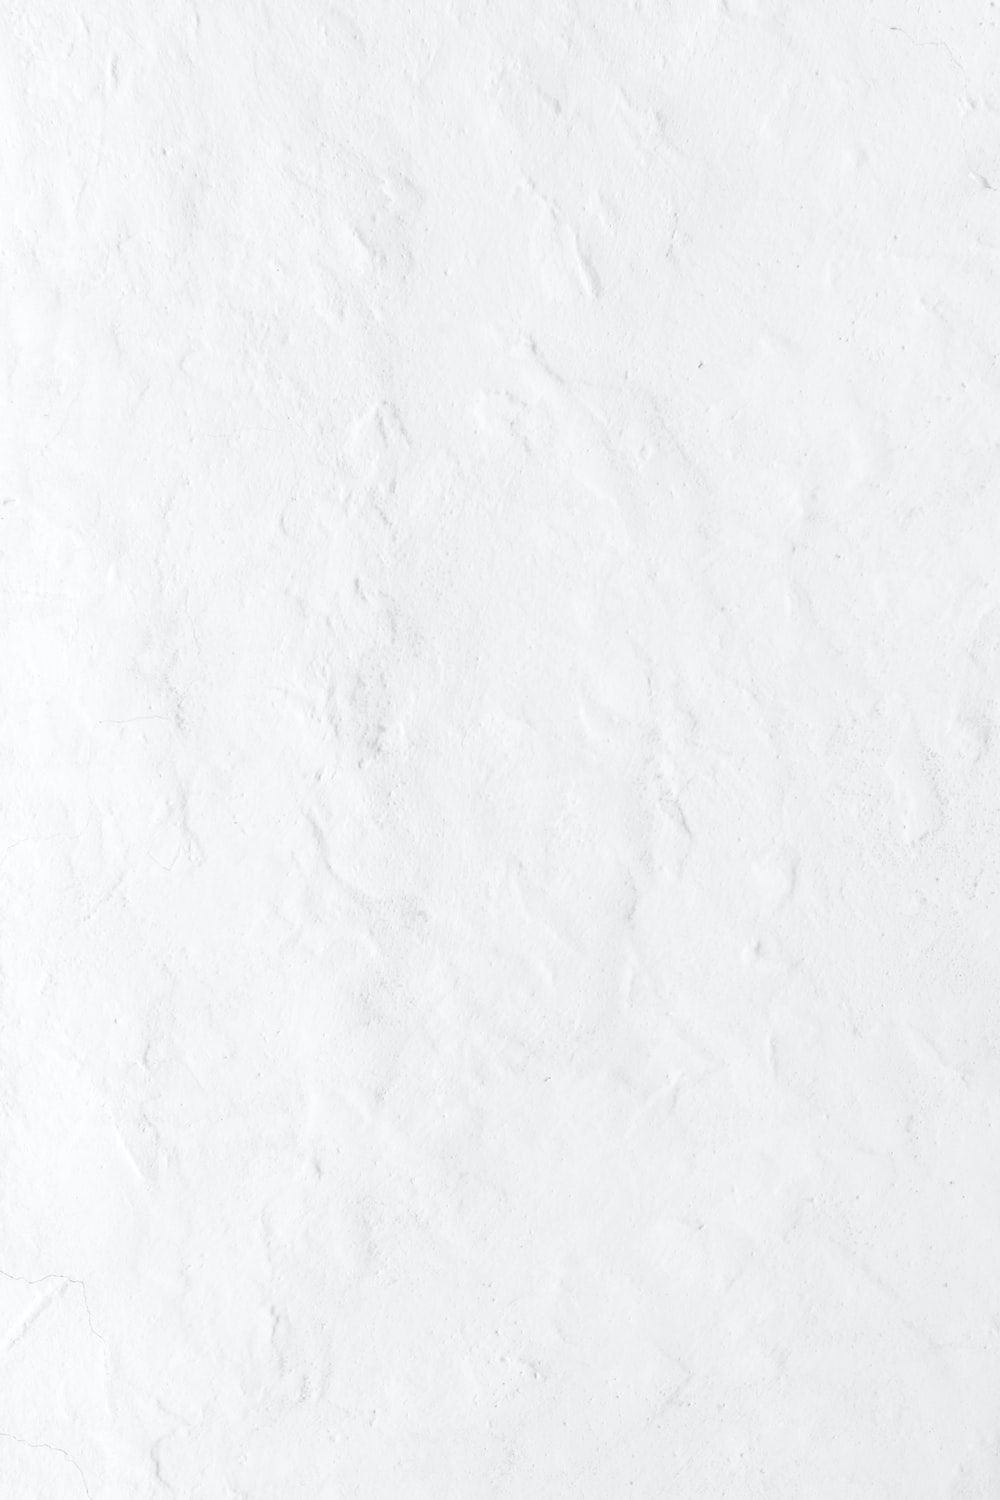 White Background Image: Download HD Background